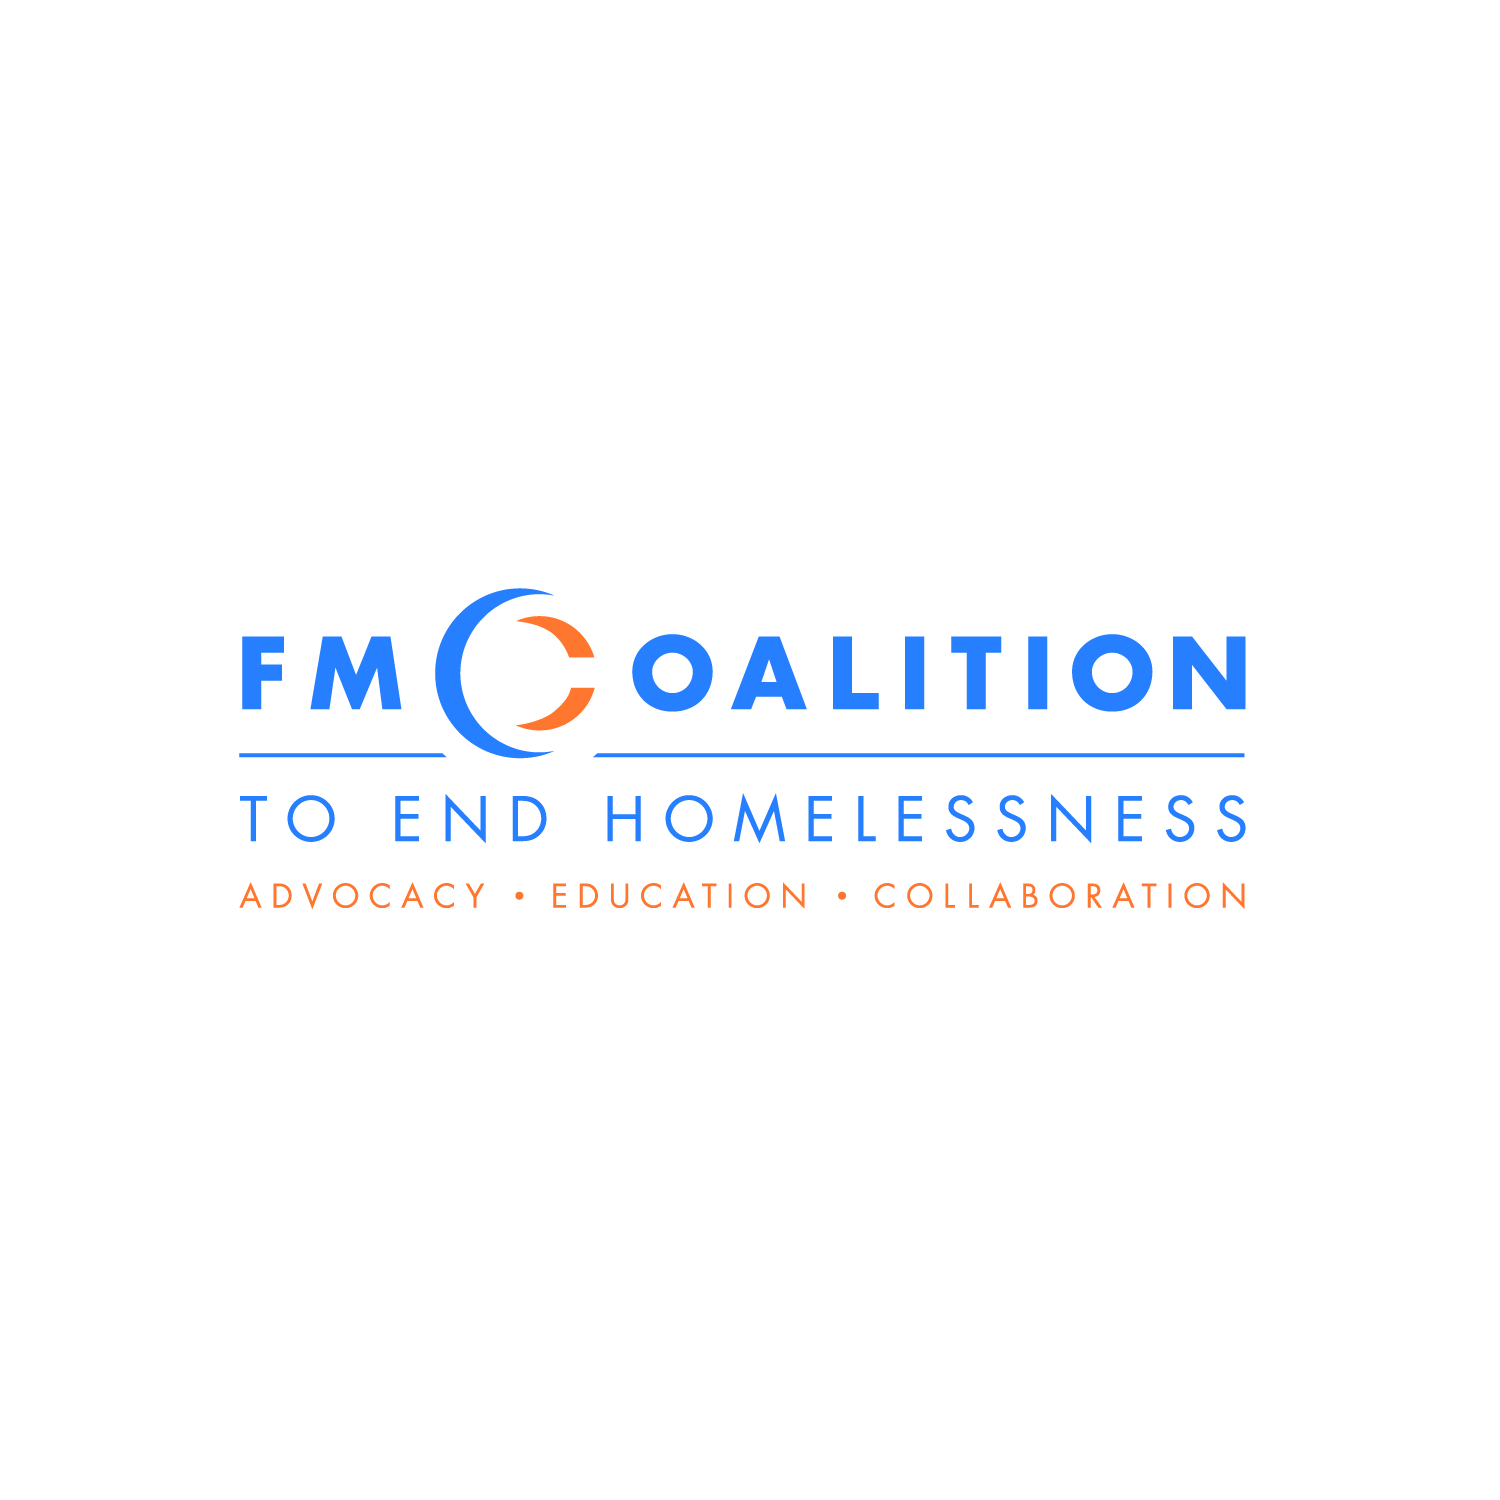 This image shows the logo for the FM Coalition to End Homelessness.